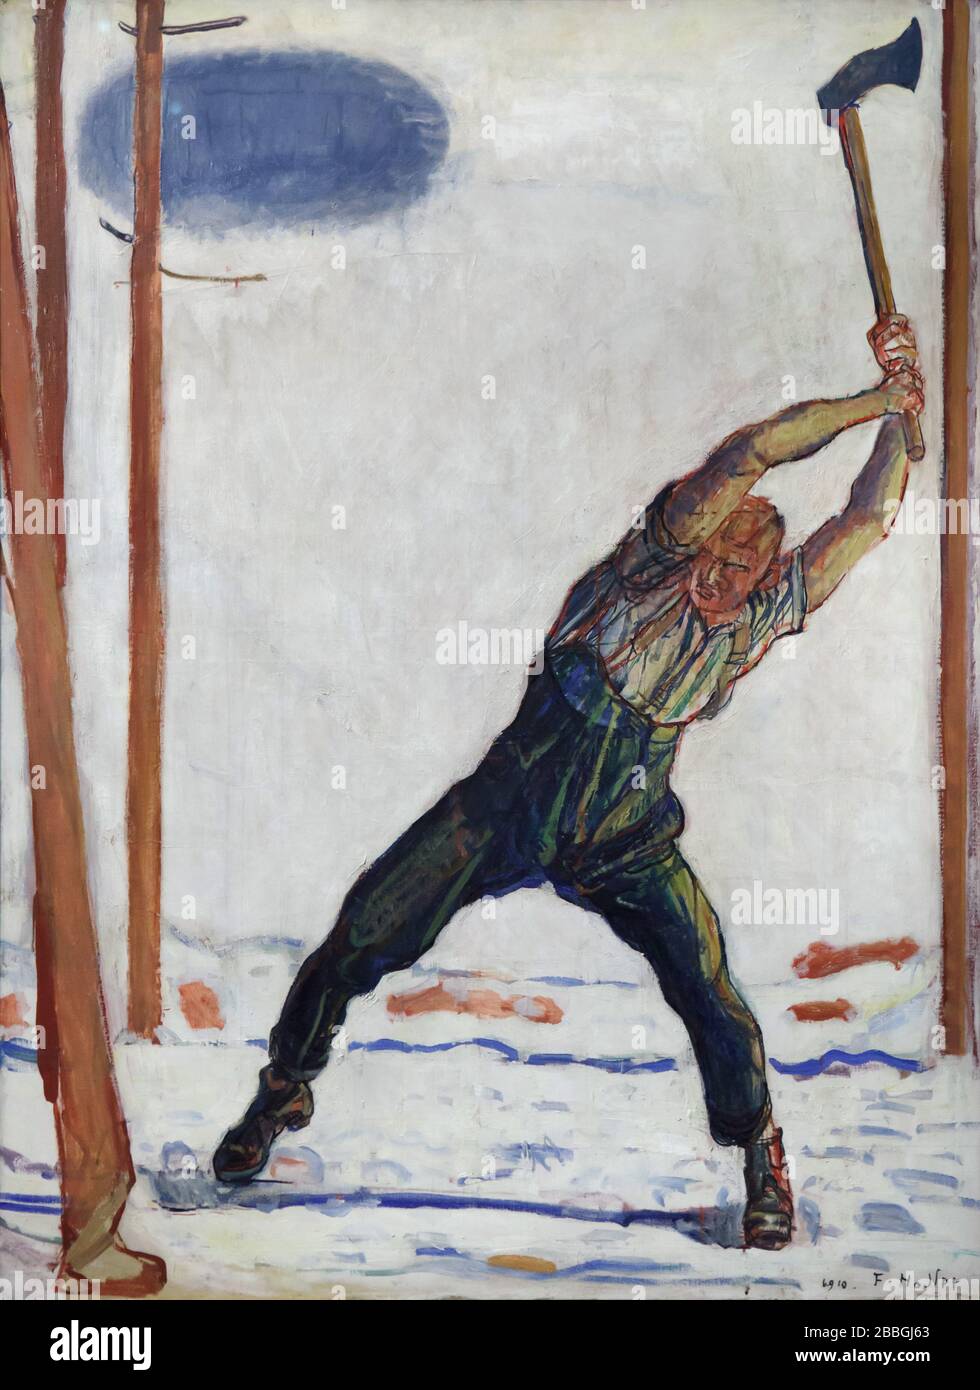 Painting 'Woodcutter' by Swiss symbolist painter Ferdinand Hodler (1910) on display in the Musée d'Orsay in Paris, France. Stock Photo